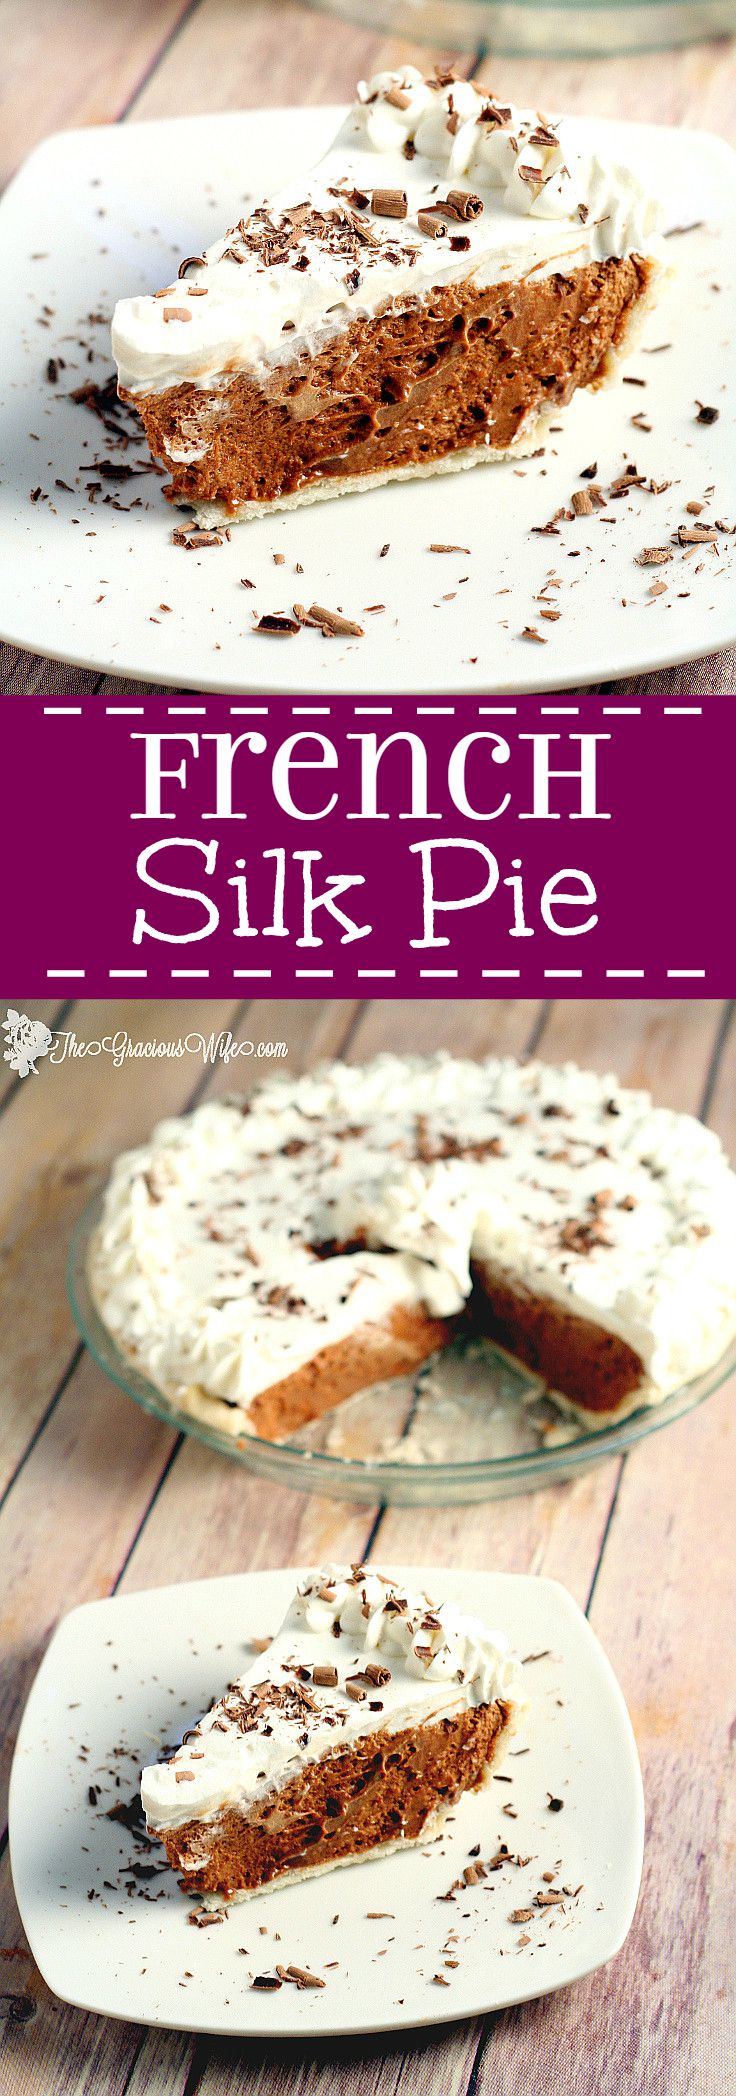 French Silk Pie Recipe - A creamy chocolate dessert french silk pie recipe with an easy perfect pie crust. This French Silk Pie recipe has none of the grittiness that I've had in other recipes. It's perfect! My favorite!